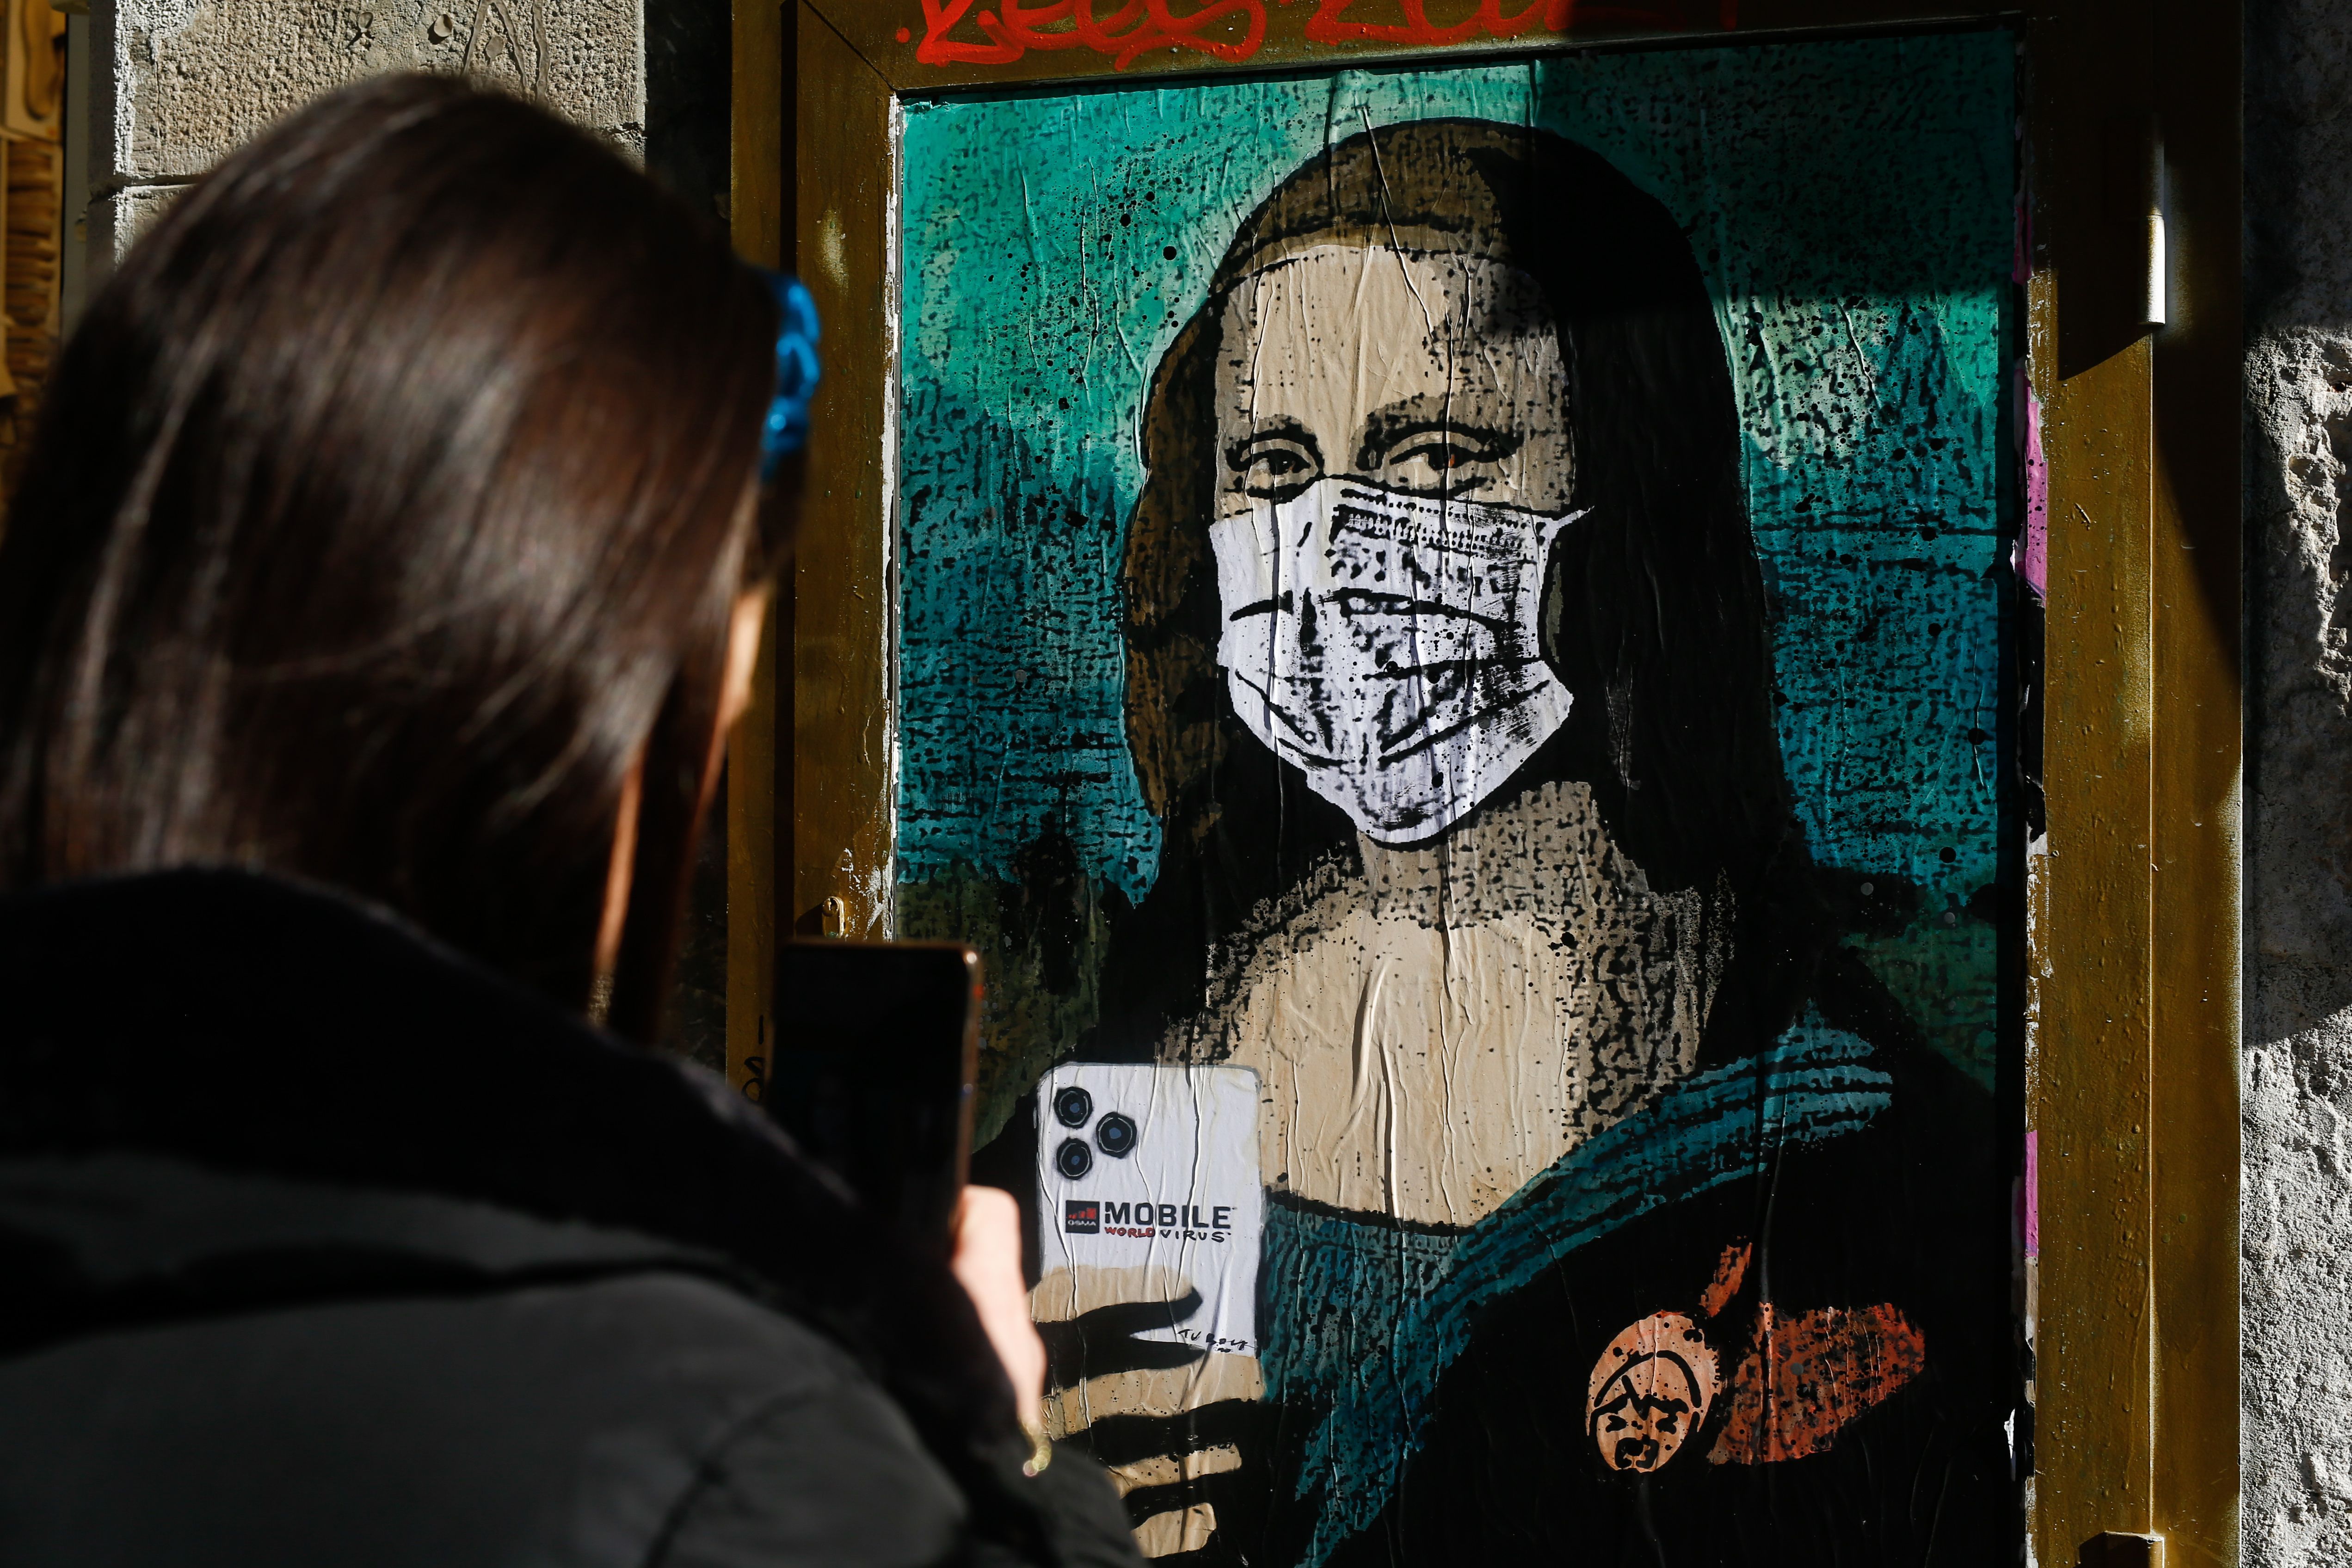 A woman takes a picture with her mobile phone of a poster by Italian urban artist Salvatore Benintende aka "TVBOY" depecting Leonardo da Vinci's Mona Lisa wearing a protective facemask 